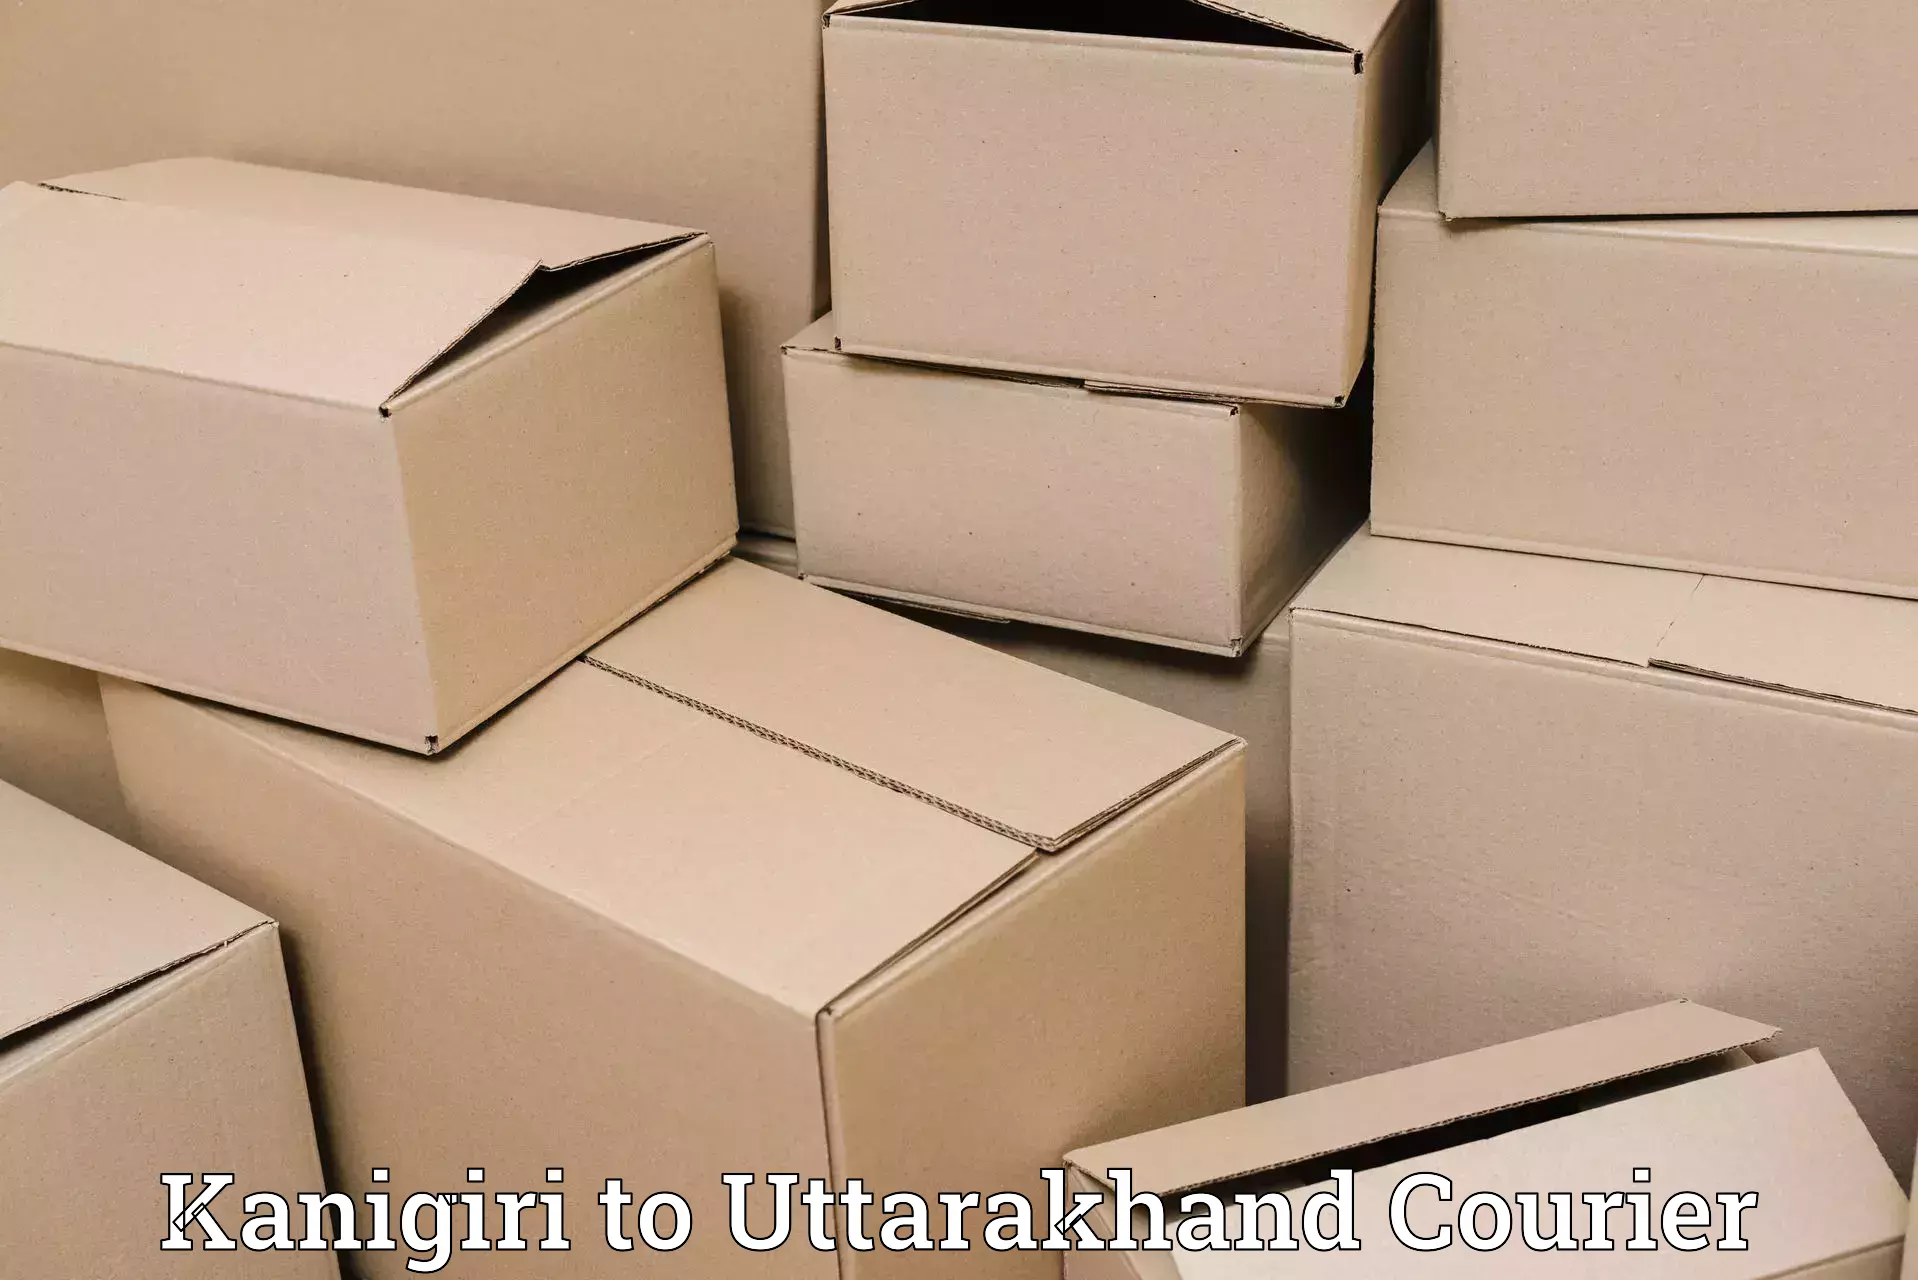 Parcel delivery automation in Kanigiri to Tehri